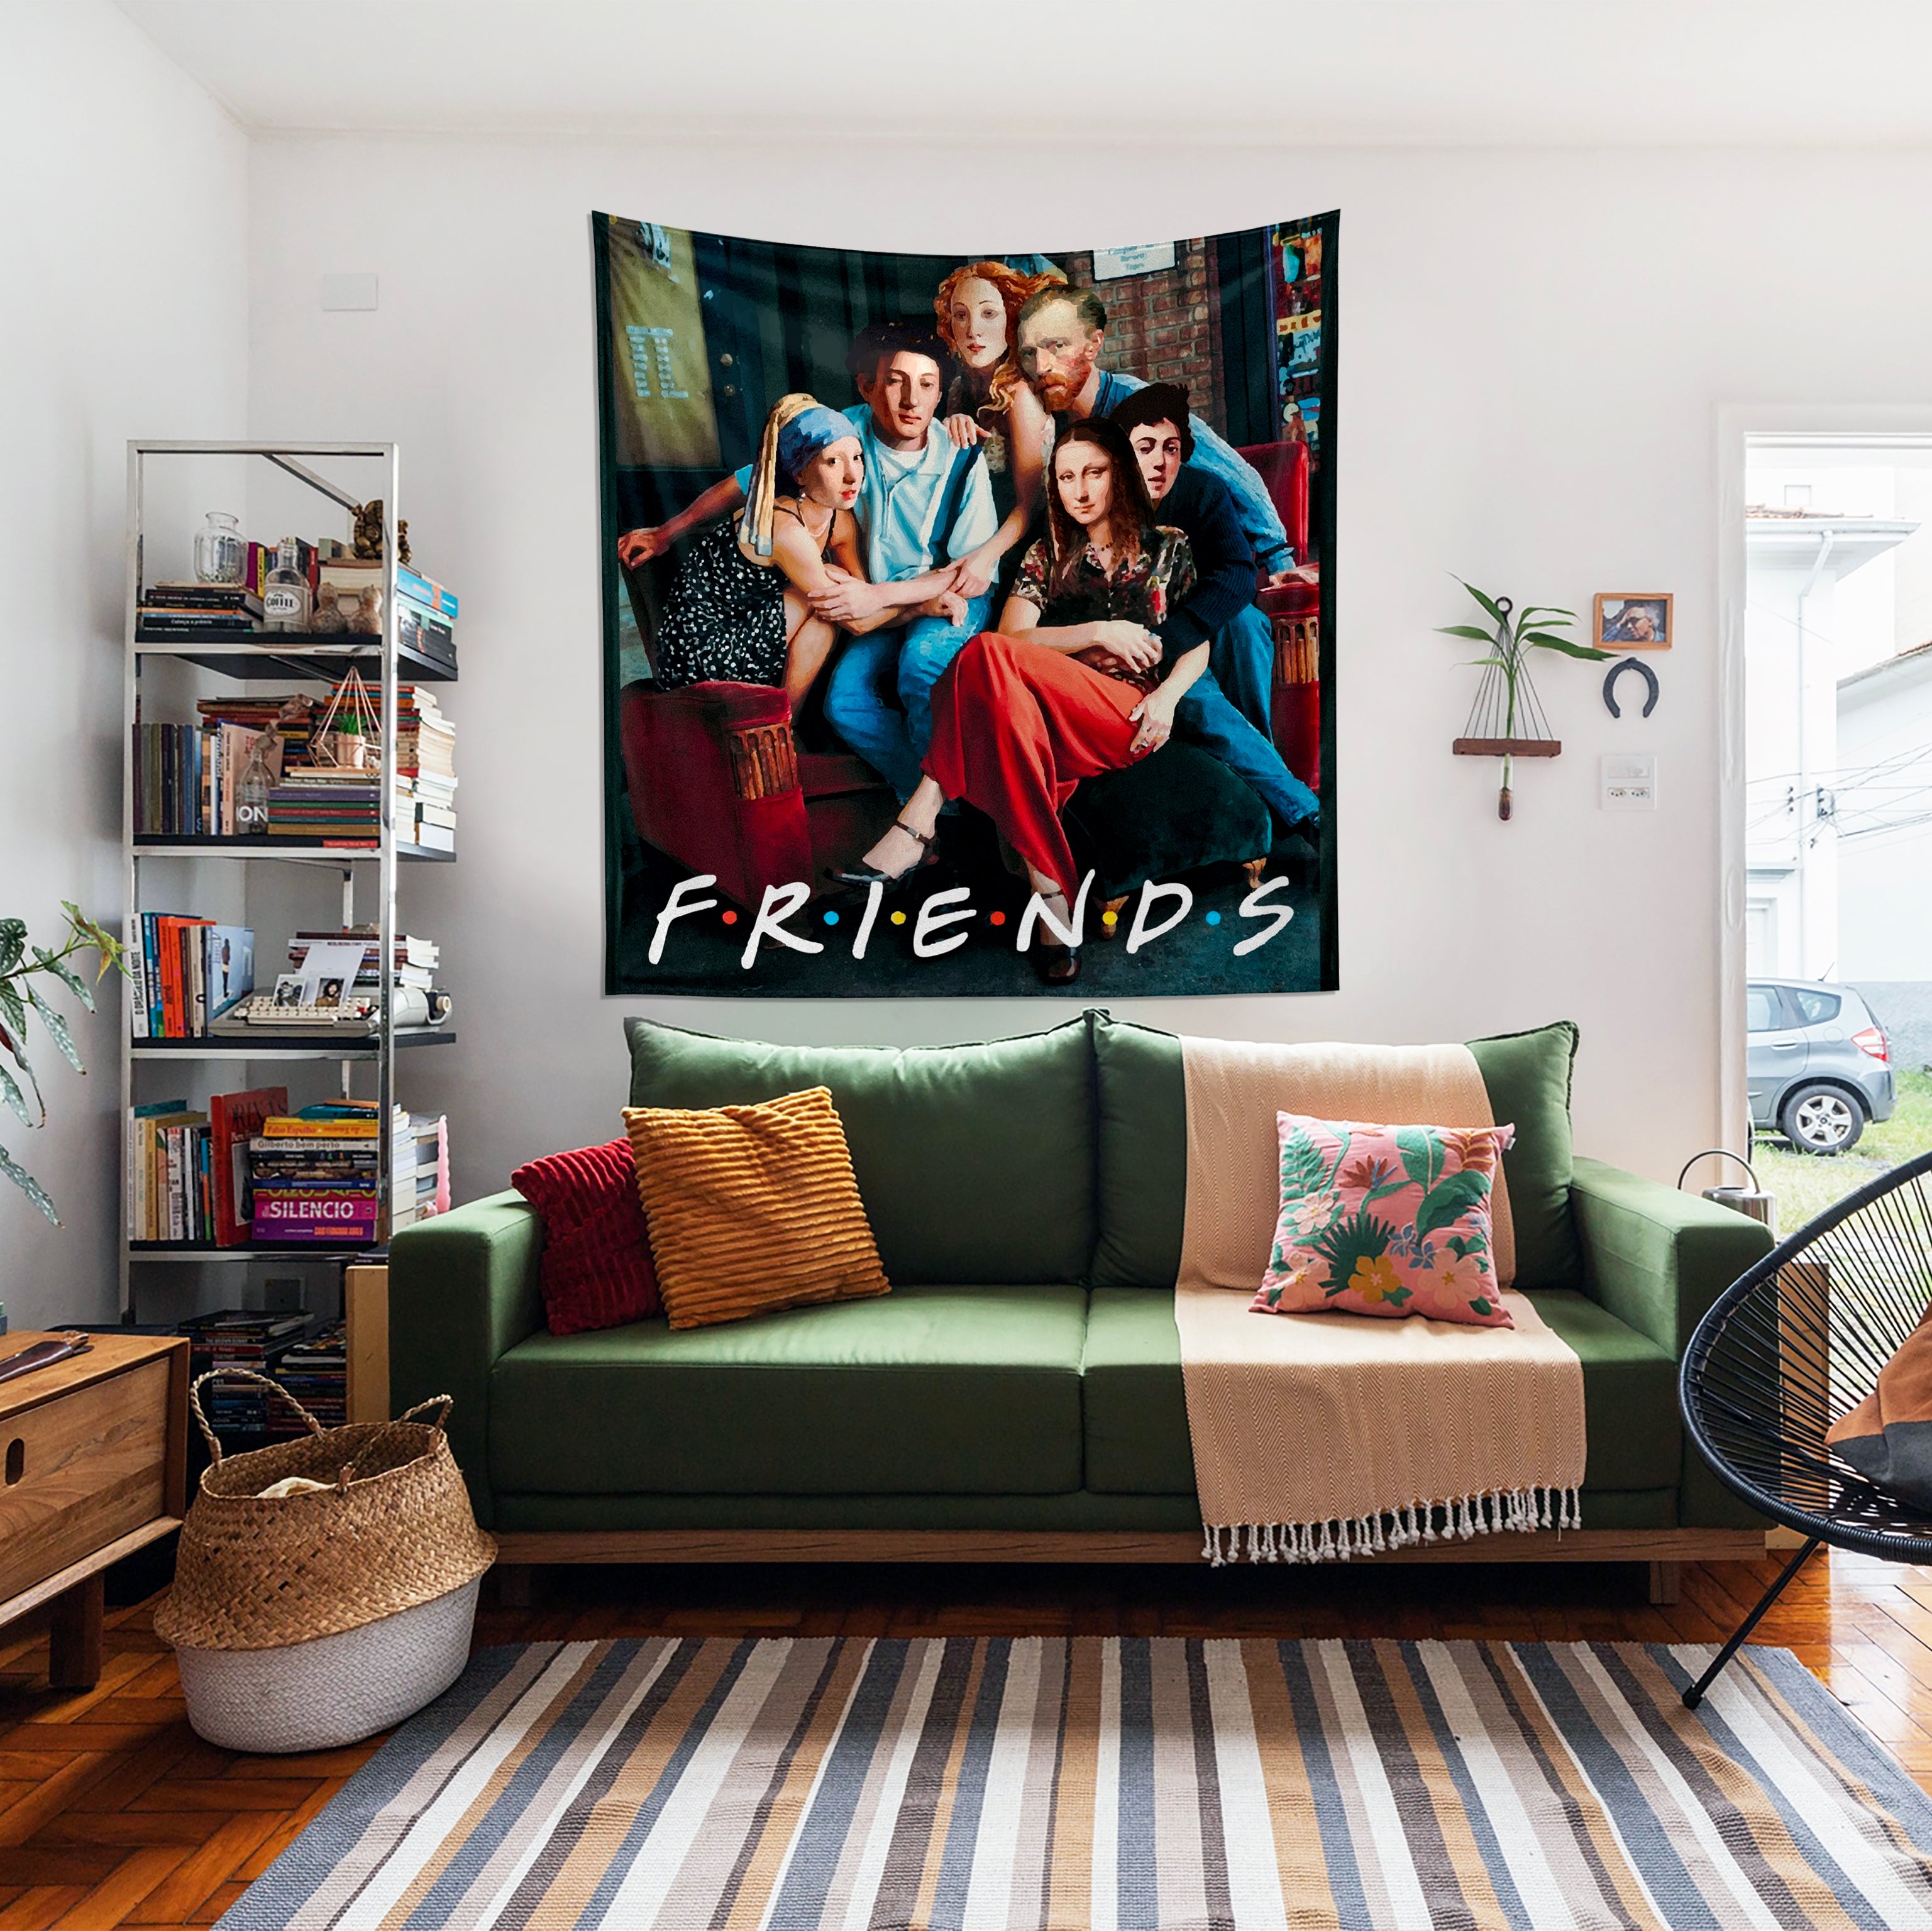 Friends Tapestry - Friends Series Themed Wall Covering Room Decoration